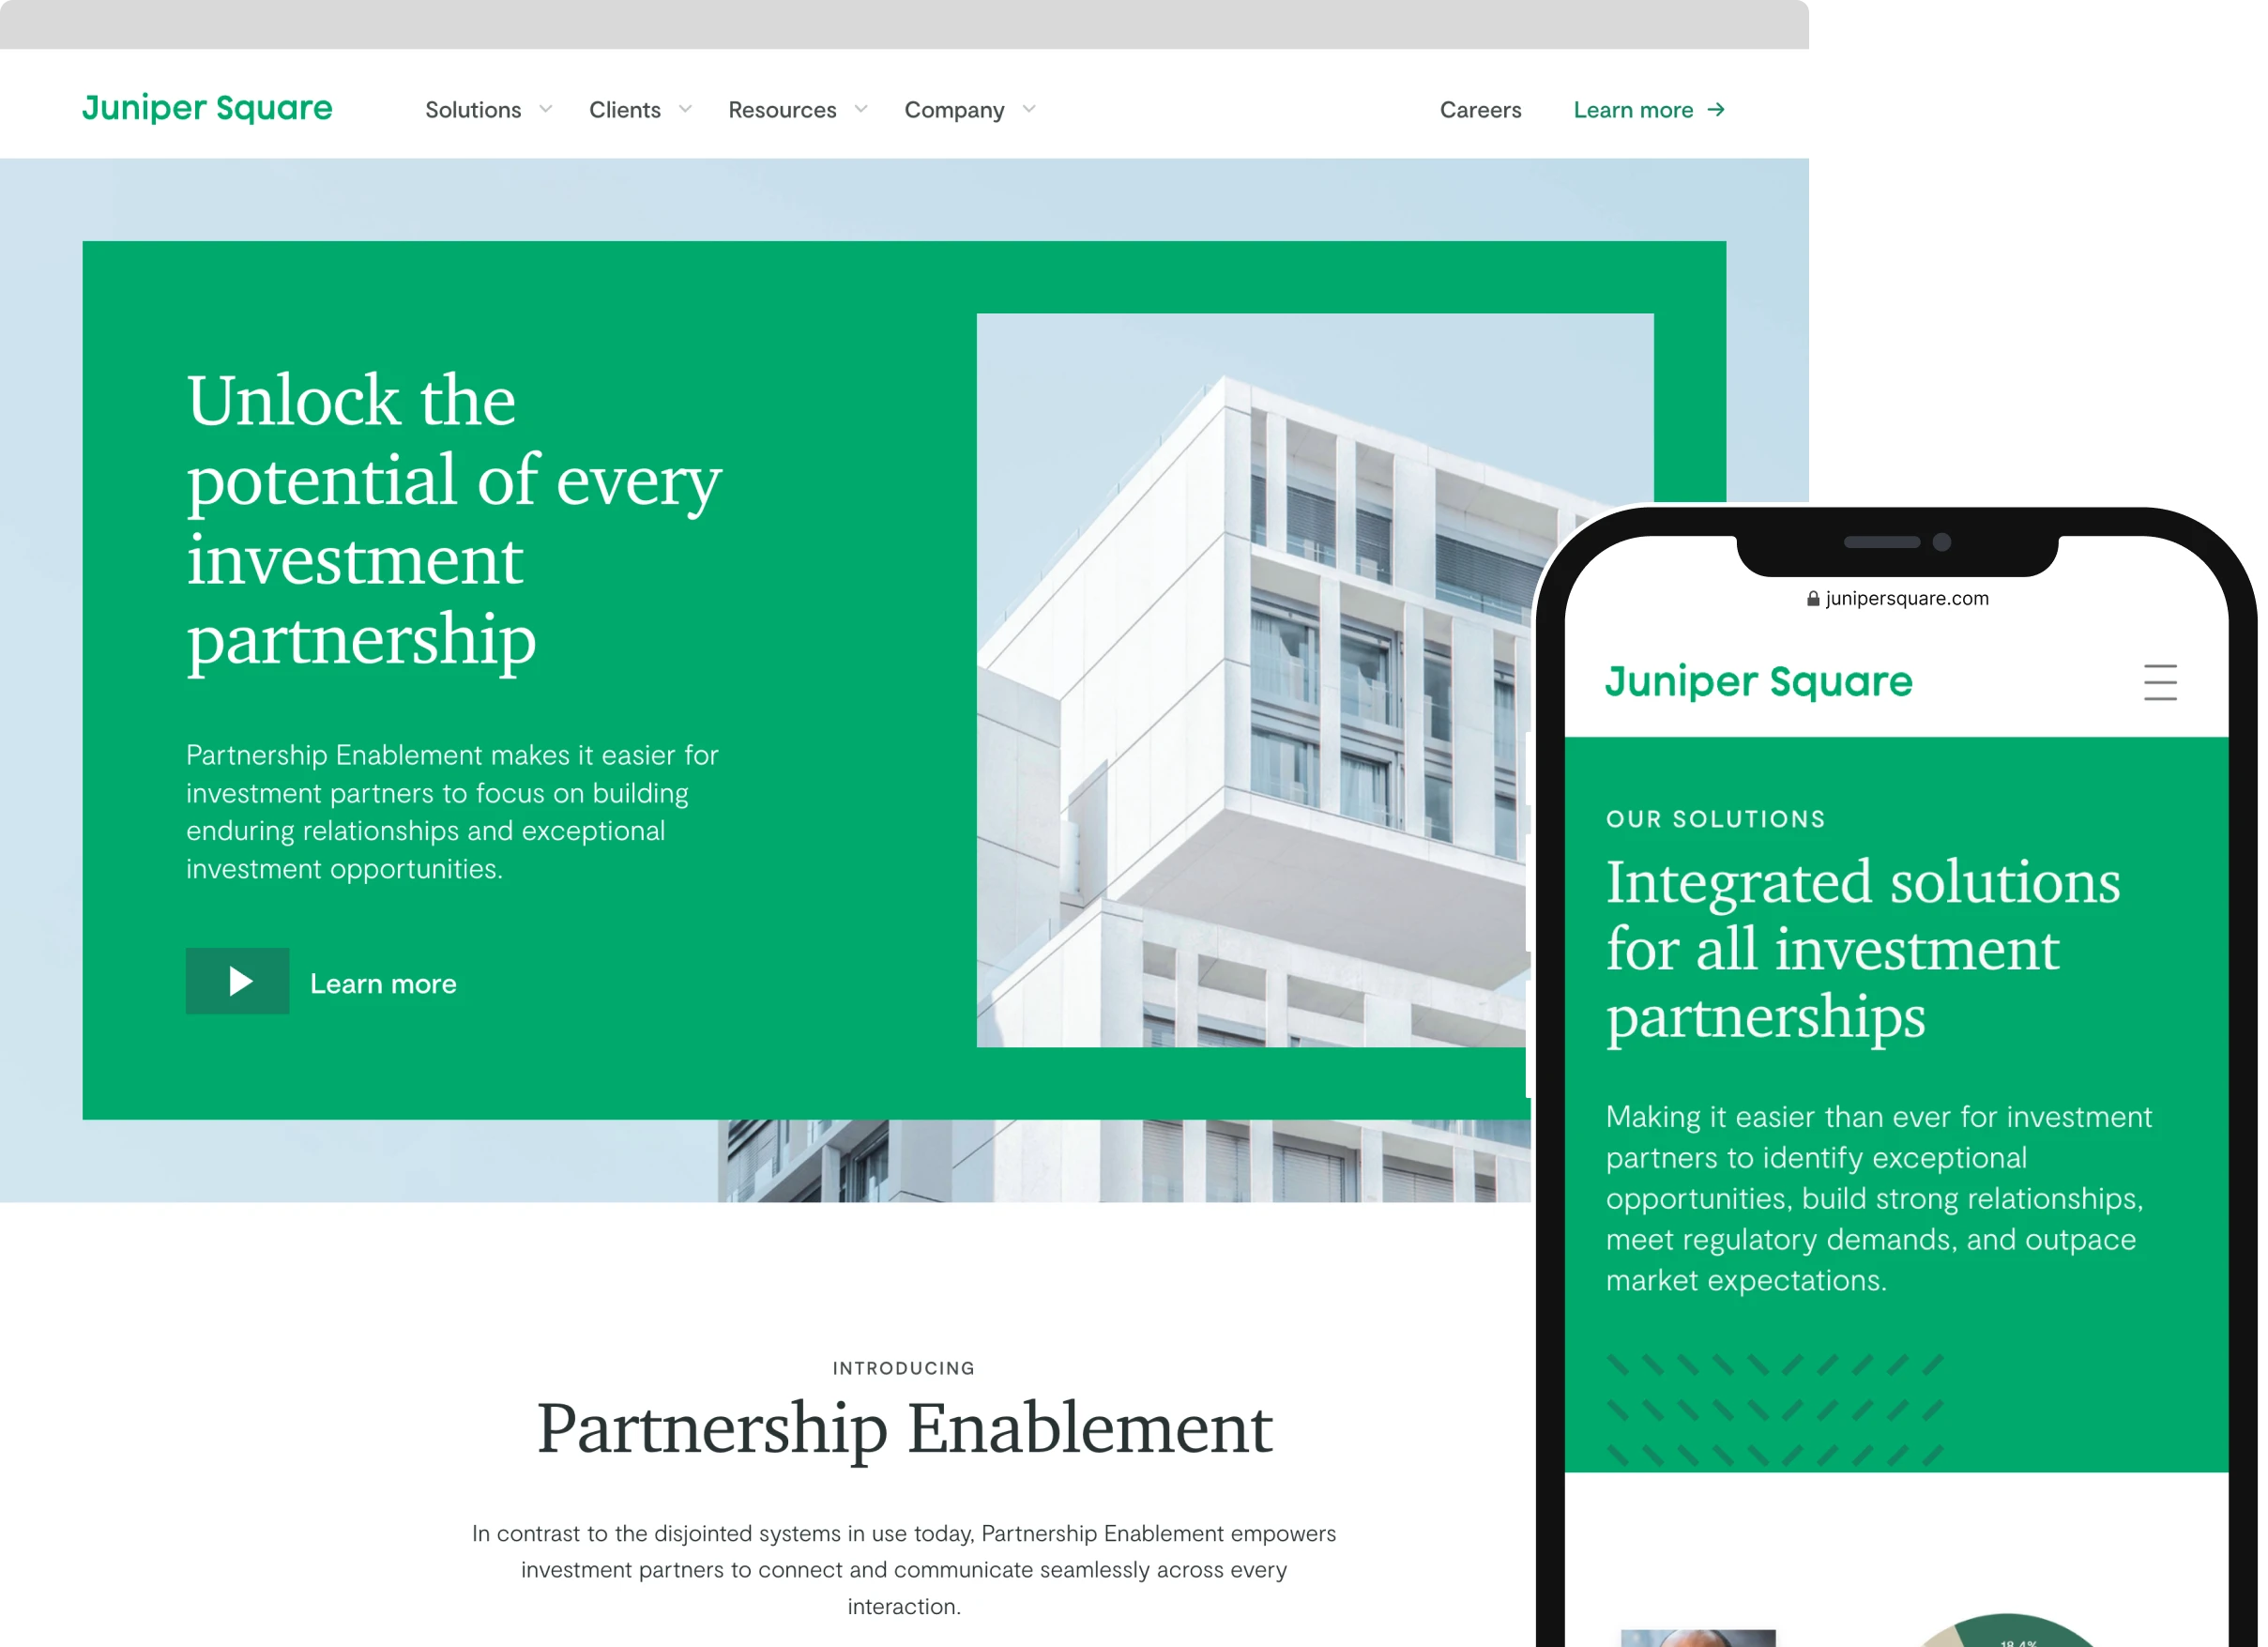 Screenshots of the Juniper Square website homepage and solutions page developed by Good Work